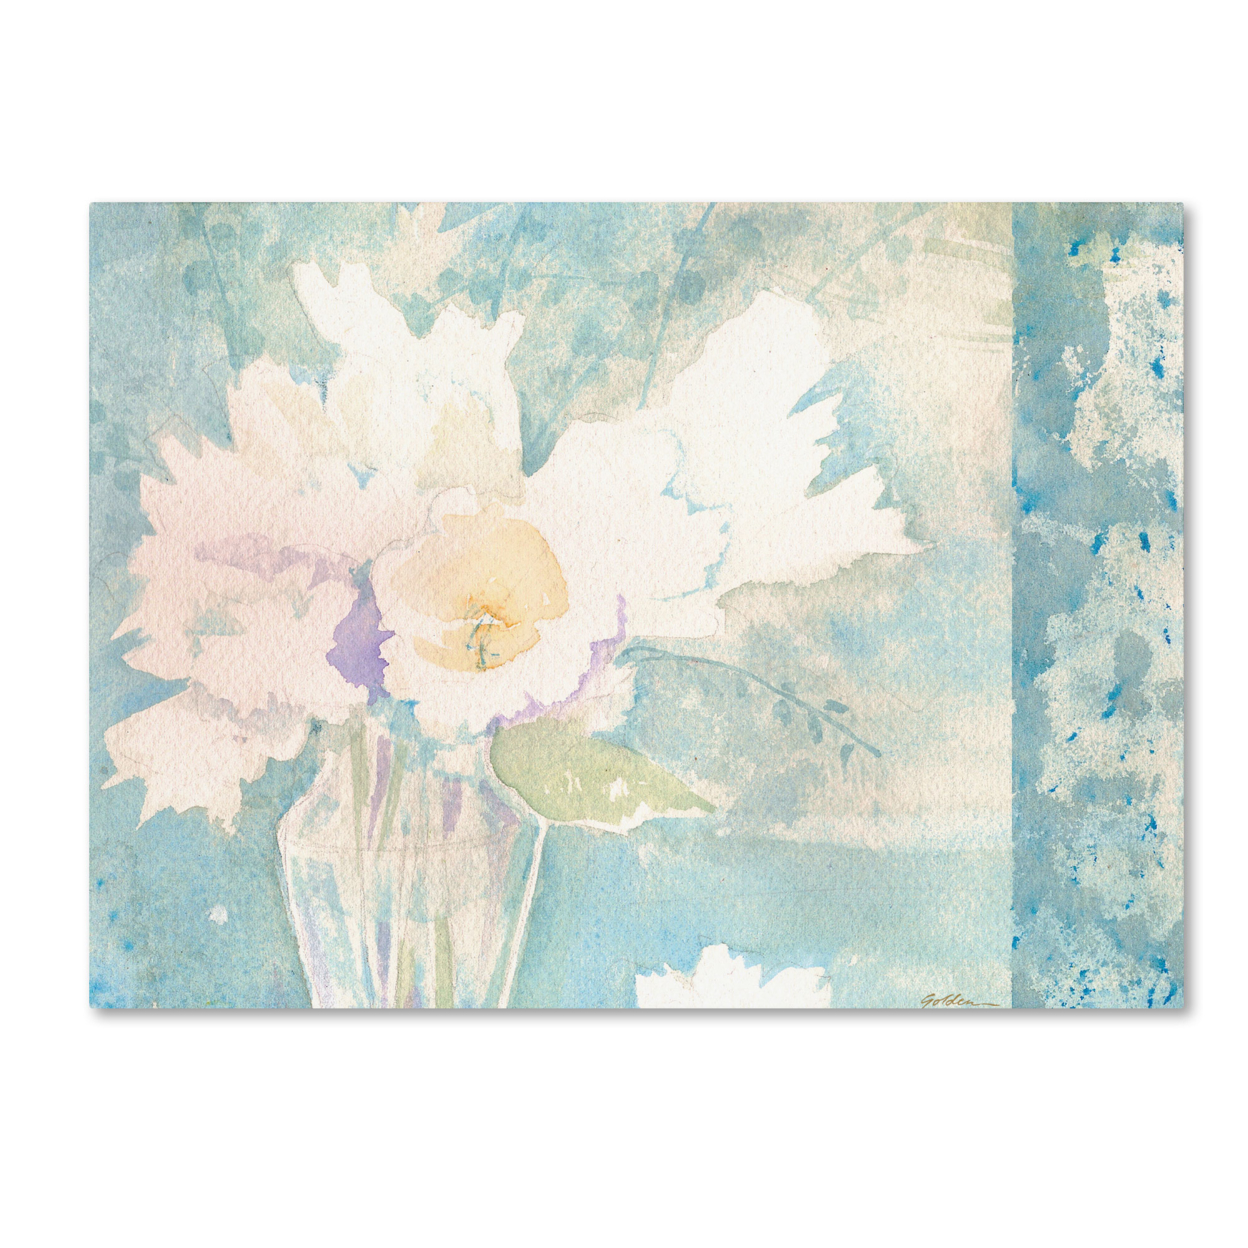 Sheila Golden 'White And Teal Composition' Canvas Wall Art 35 X 47 Inches